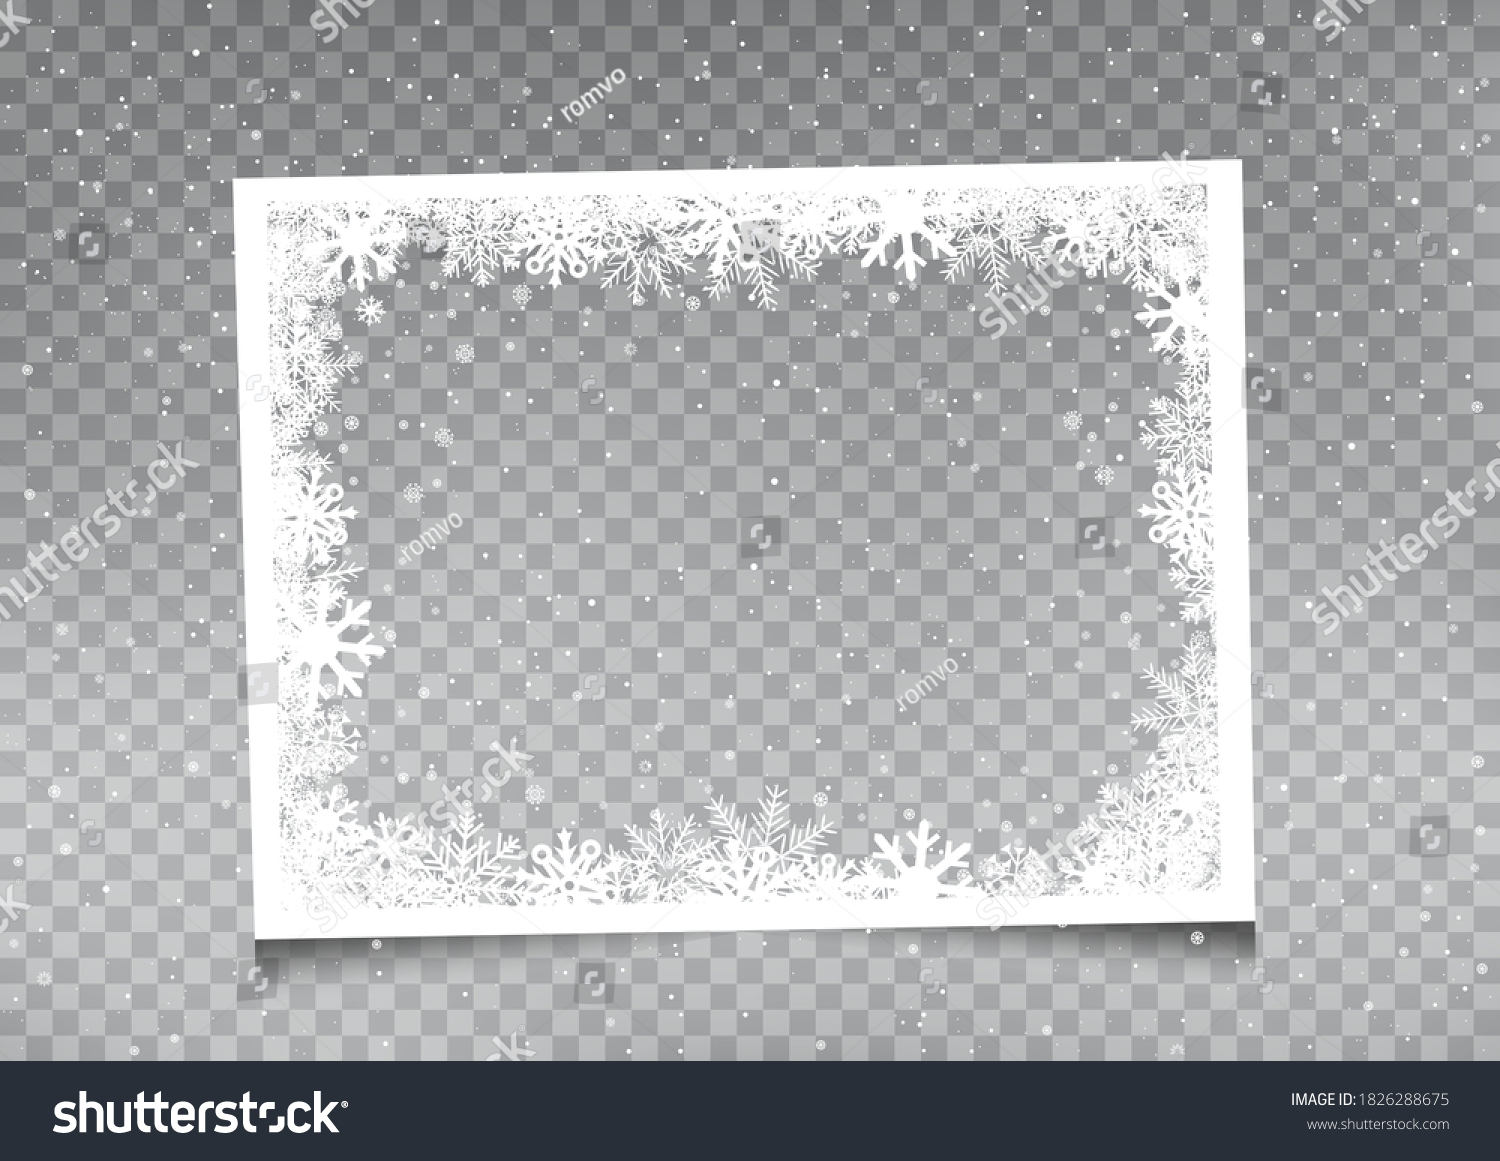 Snowy rectangular frame template on gray transparent background. Christmas snowflakes holiday ice ornament banner #1826288675